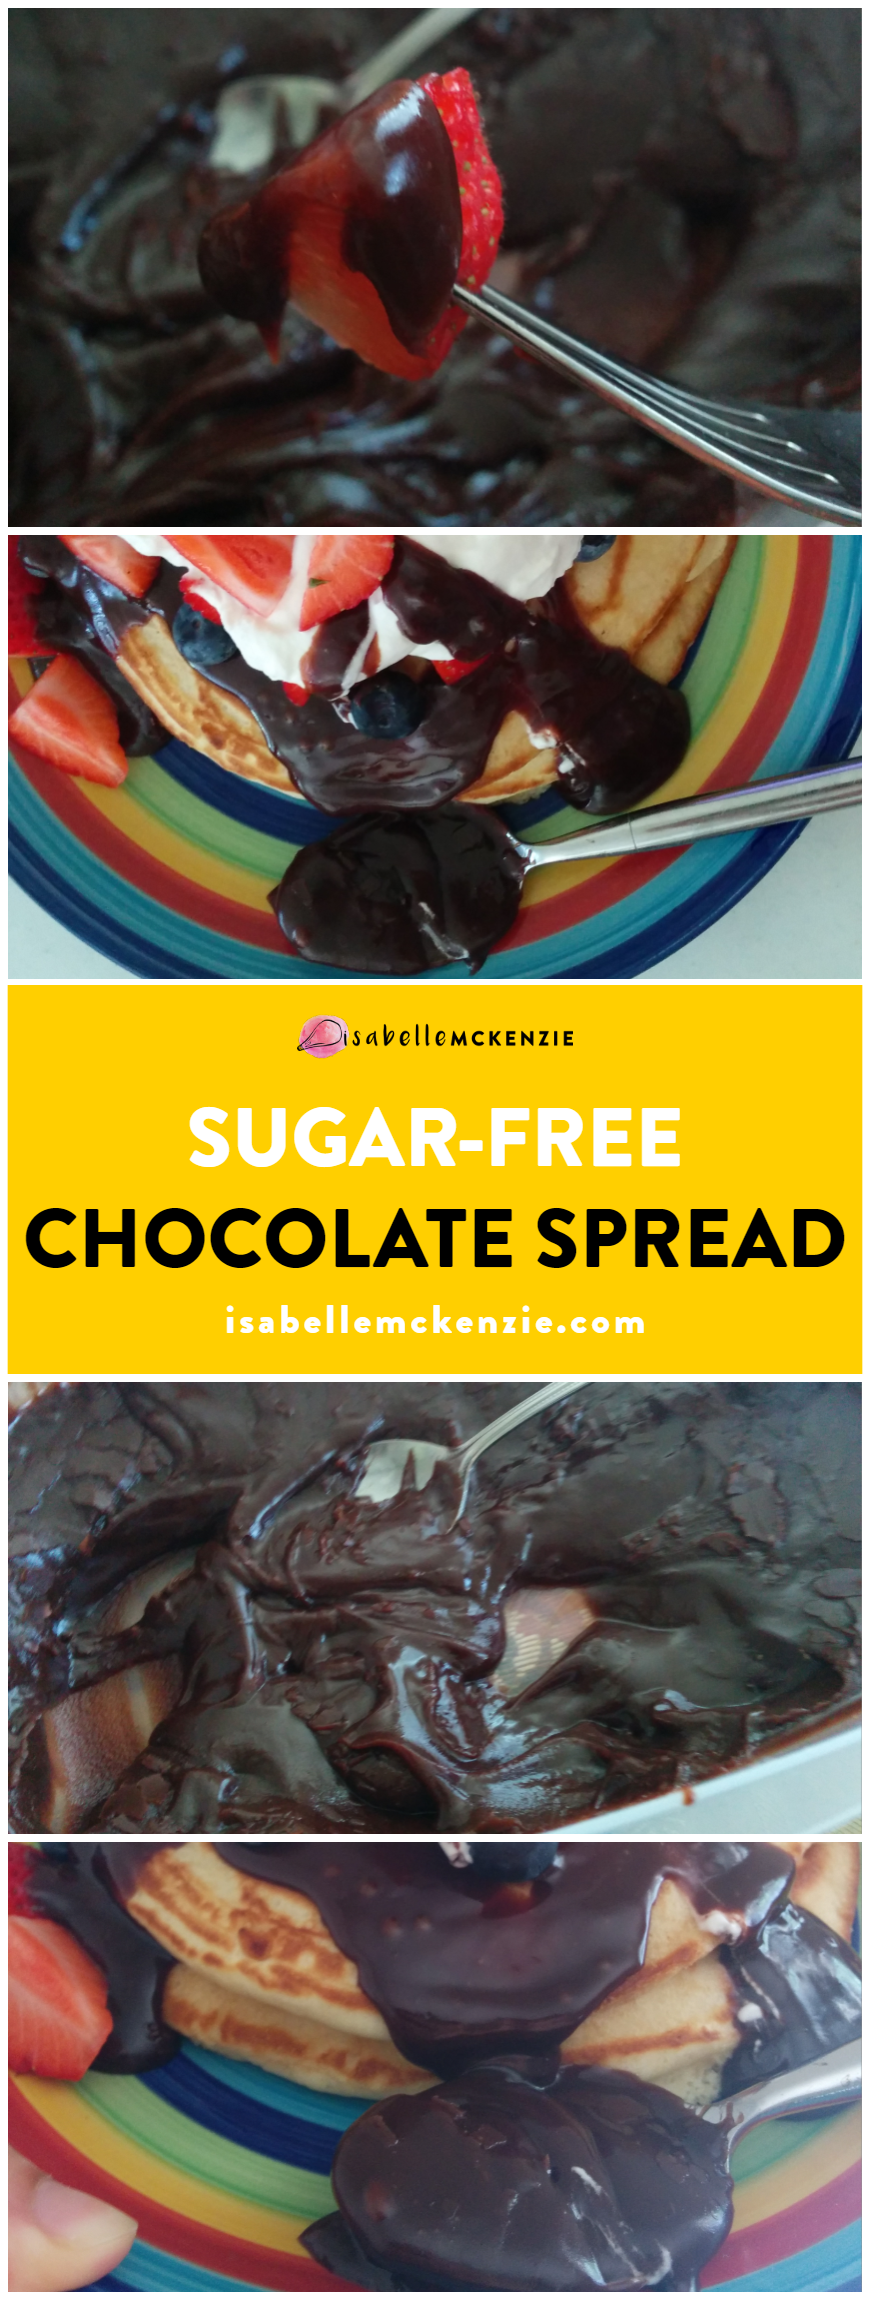 The Best Sugar-Free Chocolate Spread Recipe (Low Carb, Keto, Gluten-Free, and Diabetes Friendly)